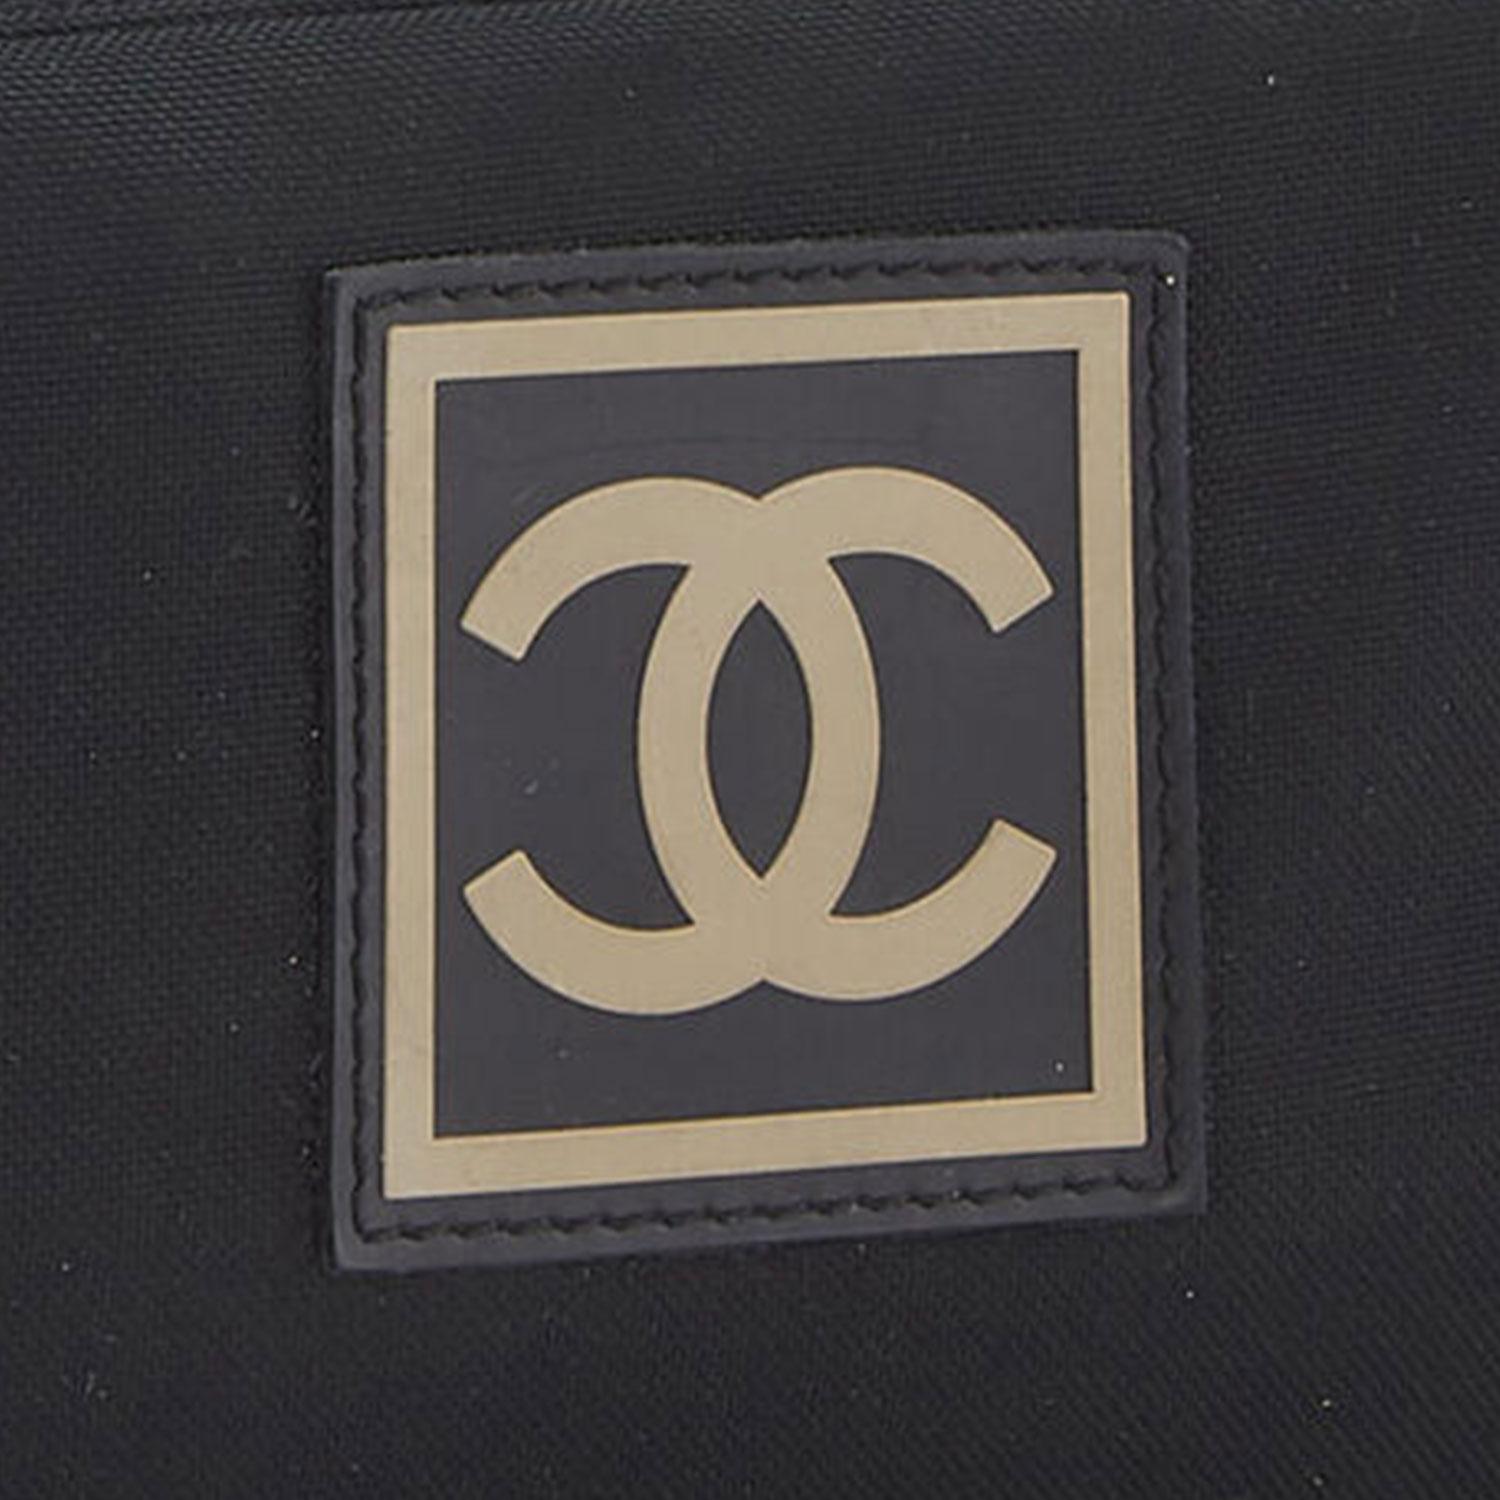 Chanel 2002 Nylon Microfiber Travel Carry On Toiletry Gadget Cosmetic Pouch Bag

Year: 2002 

black nylon
signature interlocking CC logo
logo patch to the front
jacquard logo motif
top zip fastening
two main compartments

11